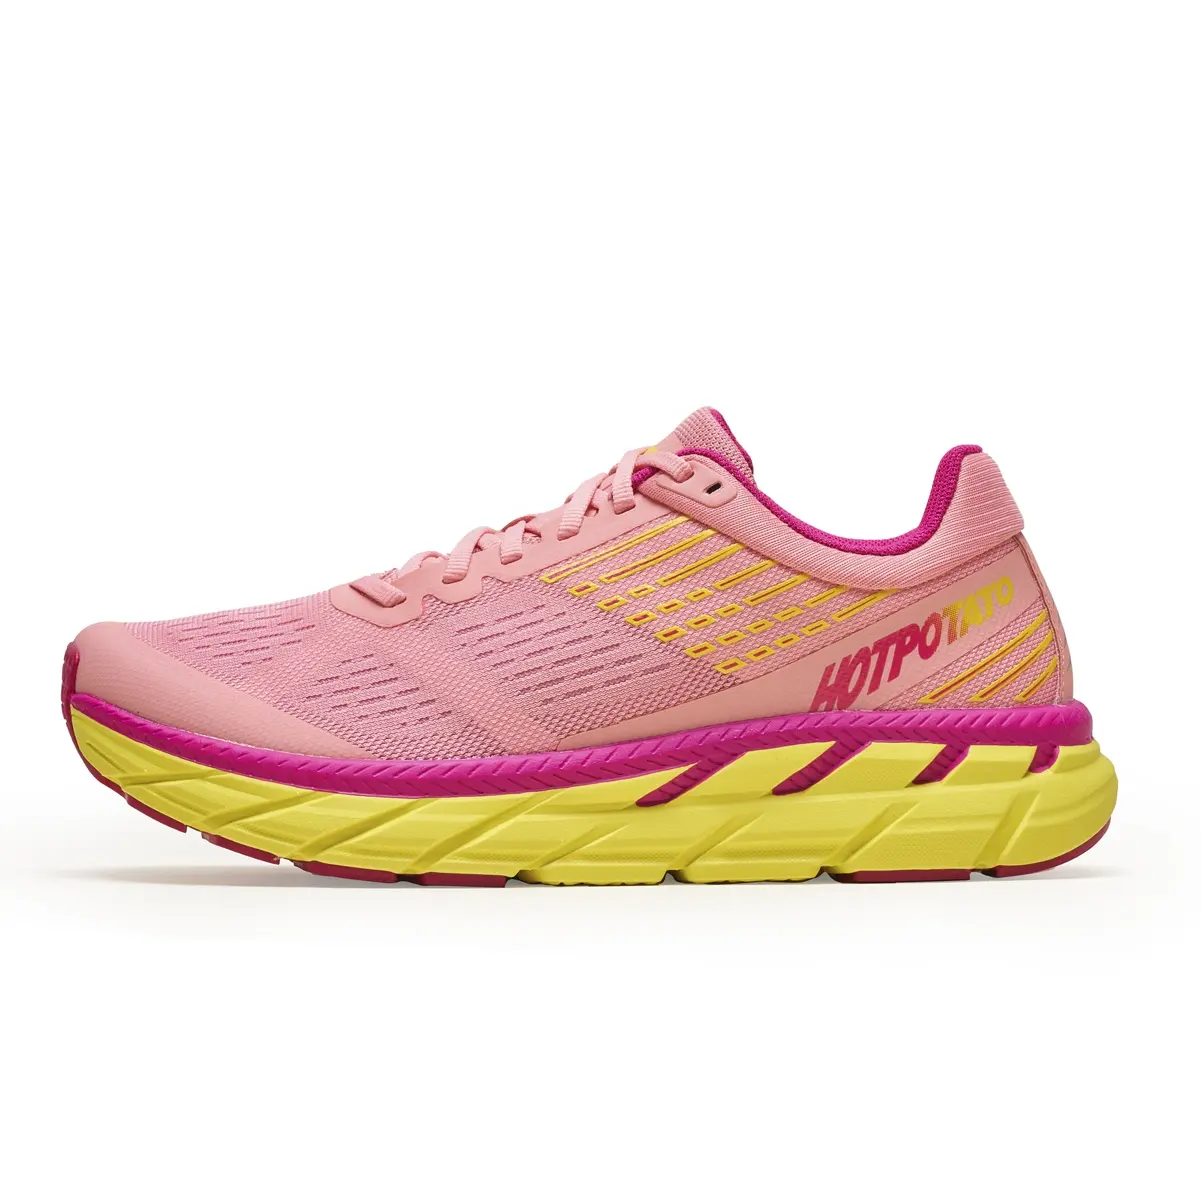 most cushioned running shoes for women new design marathon training sneakers R16 pink